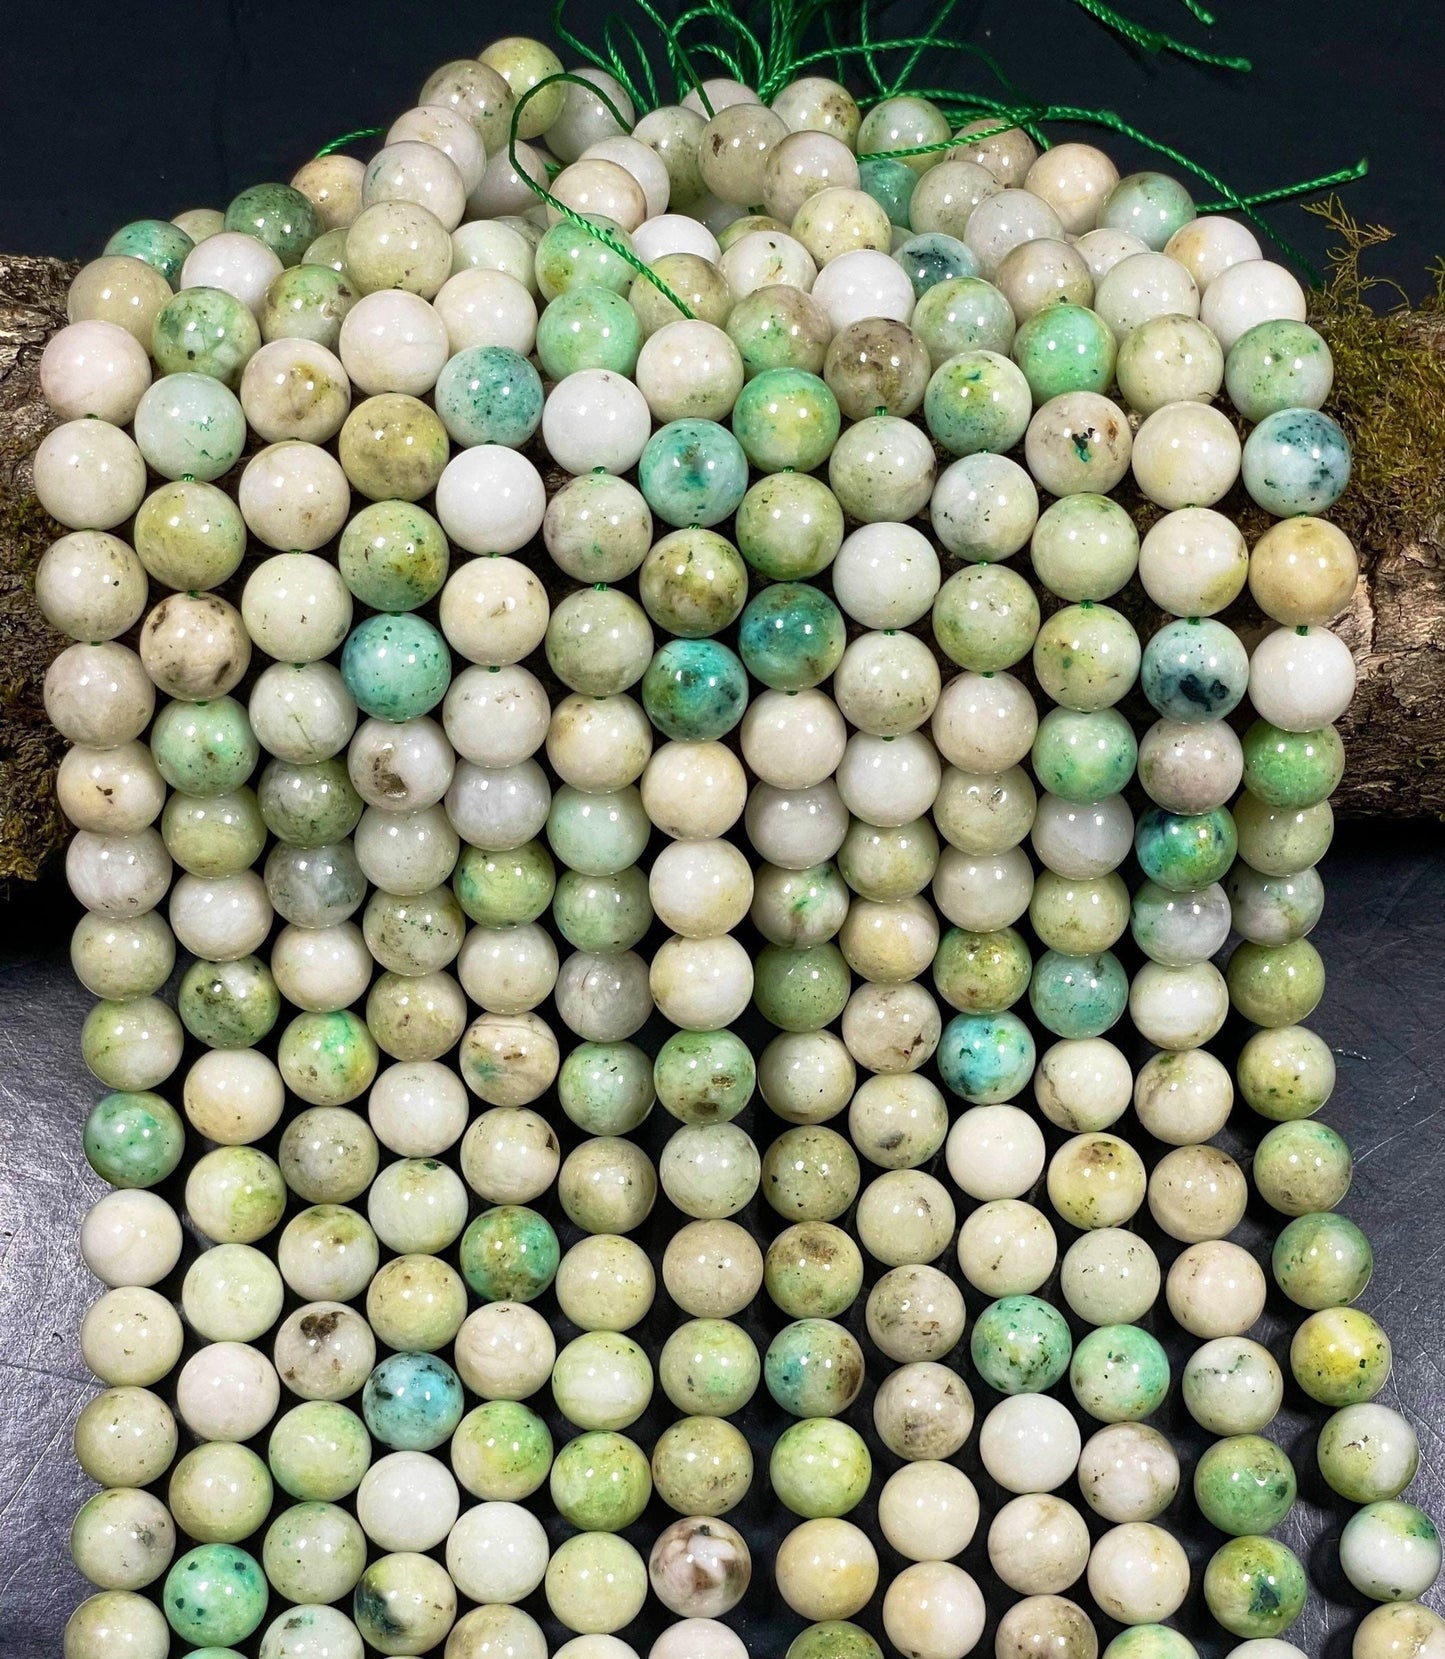 AAA Natural Mariposite Gemstone Bead 6mm 8mm 10mm Round Bead, Gorgeous Natural Light Green White Color Gemstone Beads